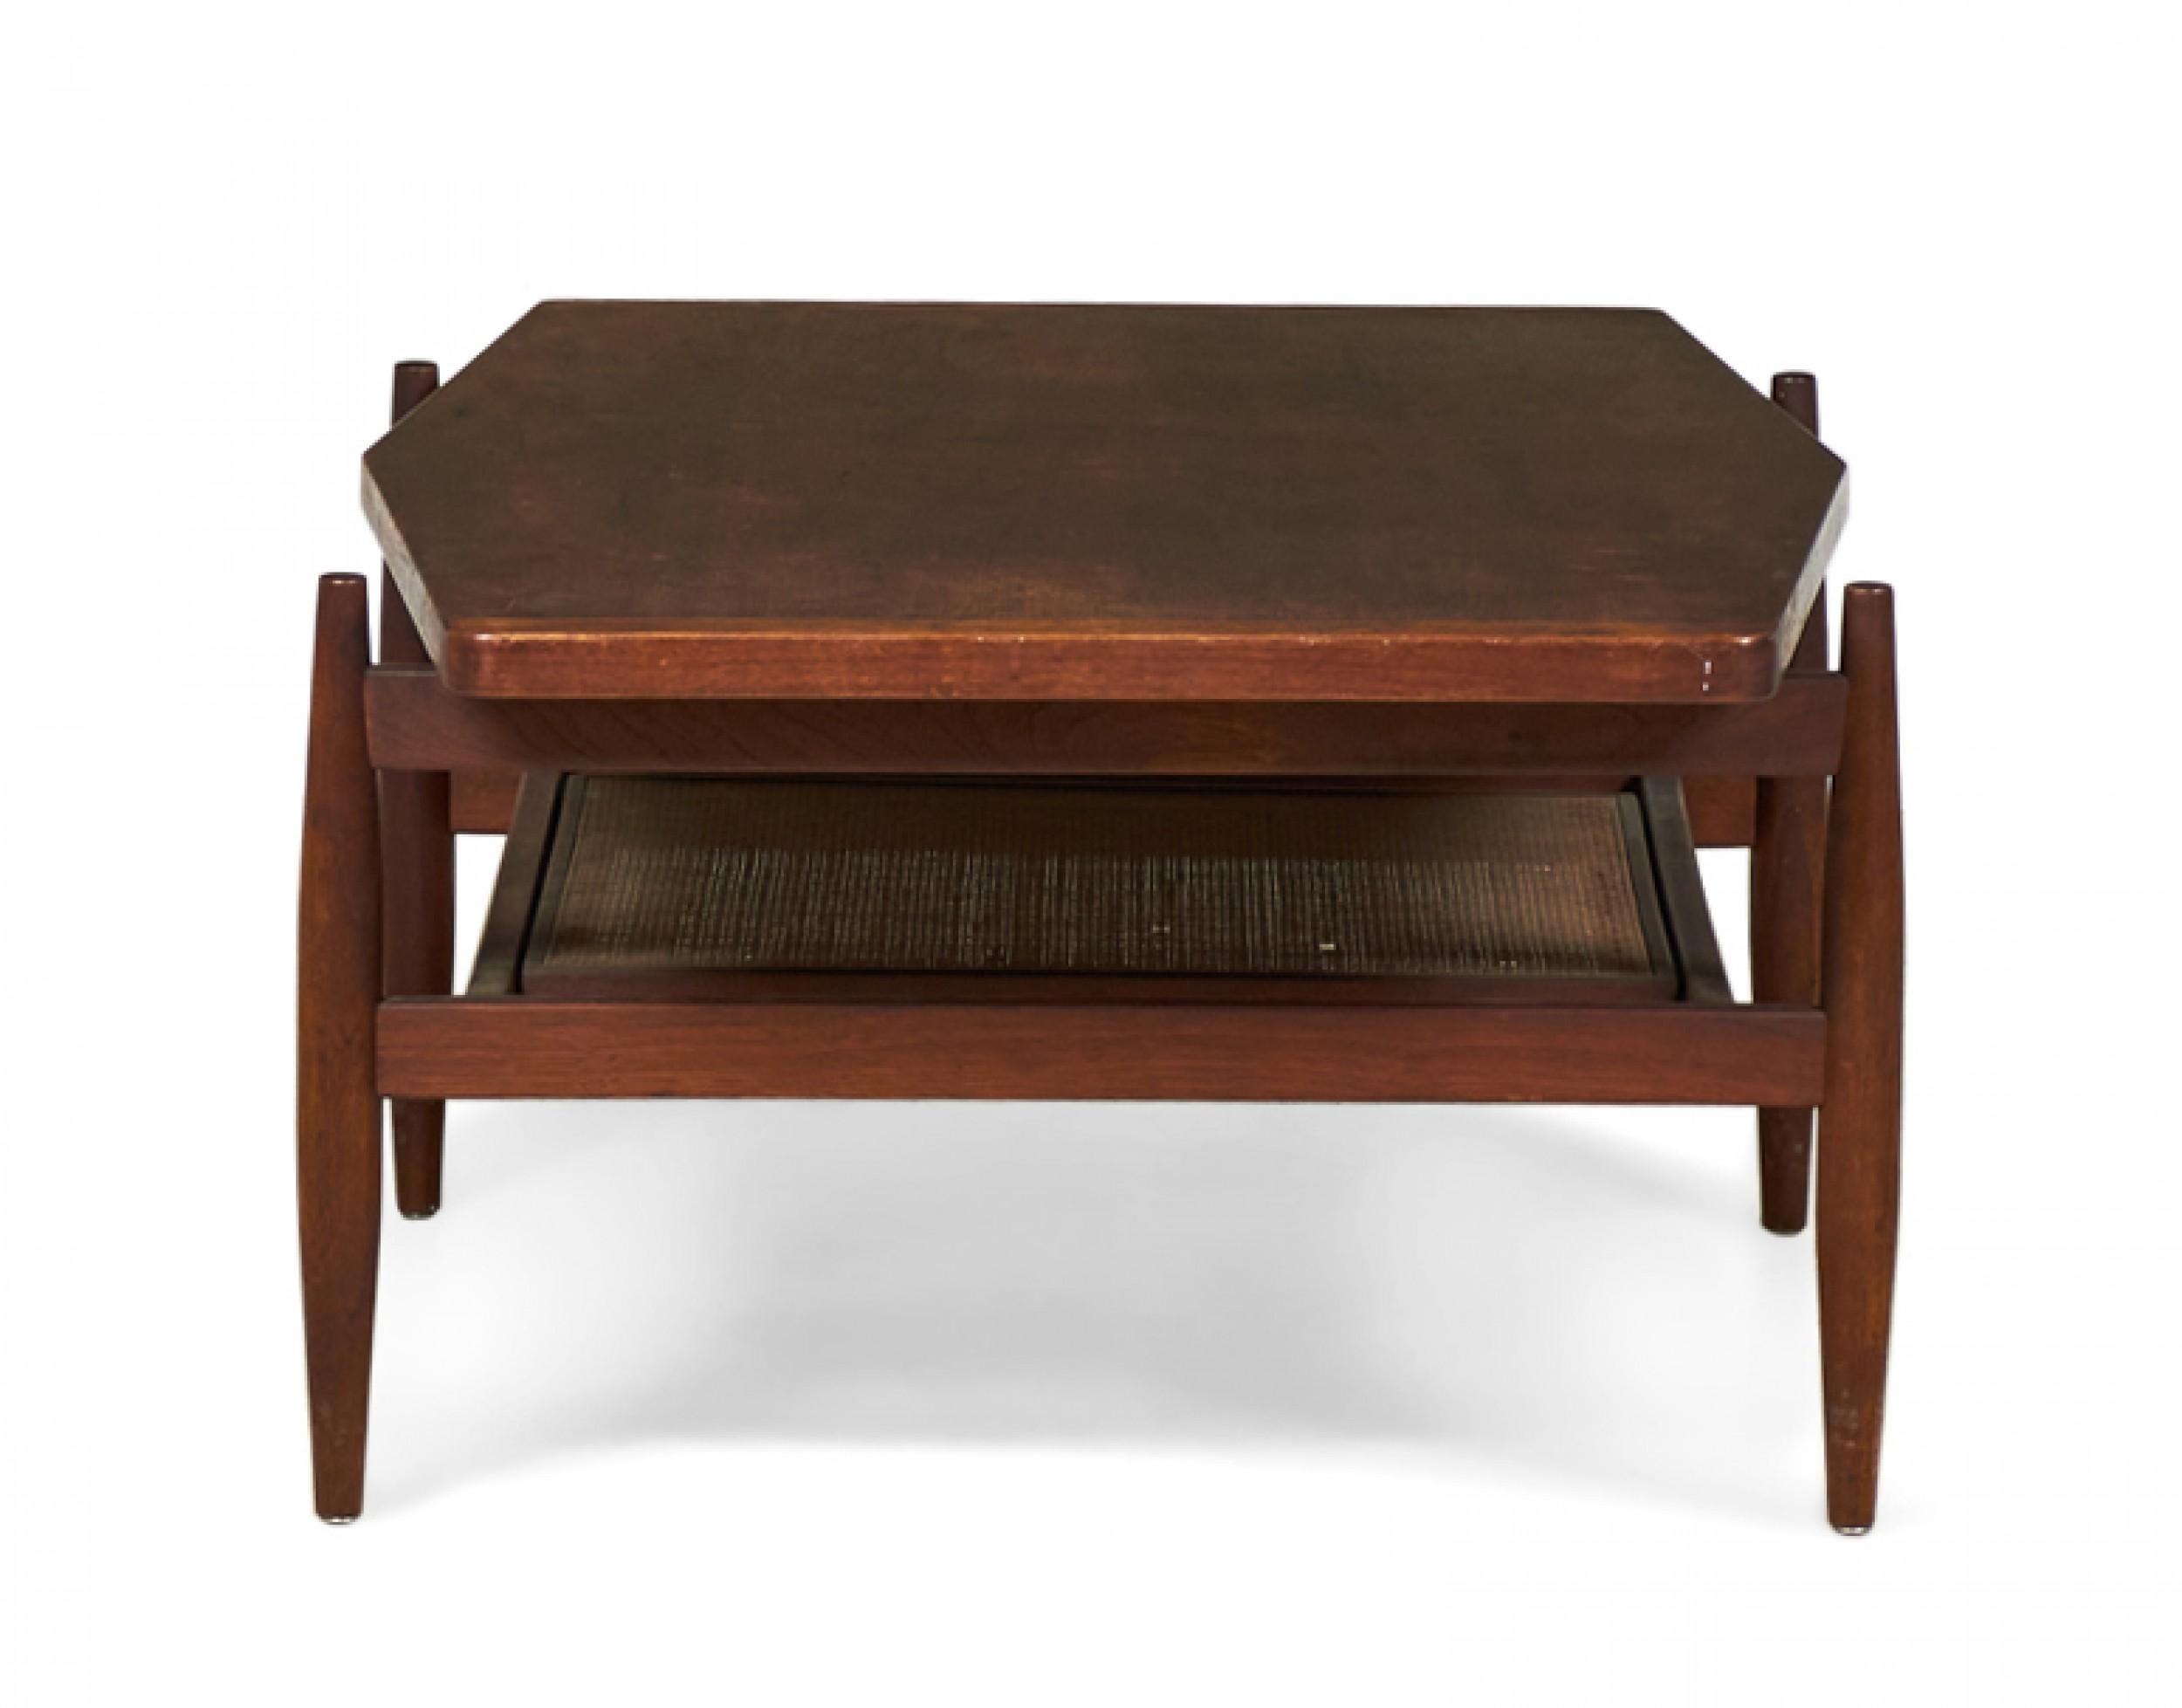 20th Century Jens Risom Mid-Century Diamond Top Walnut and Caning Coffee Table For Sale